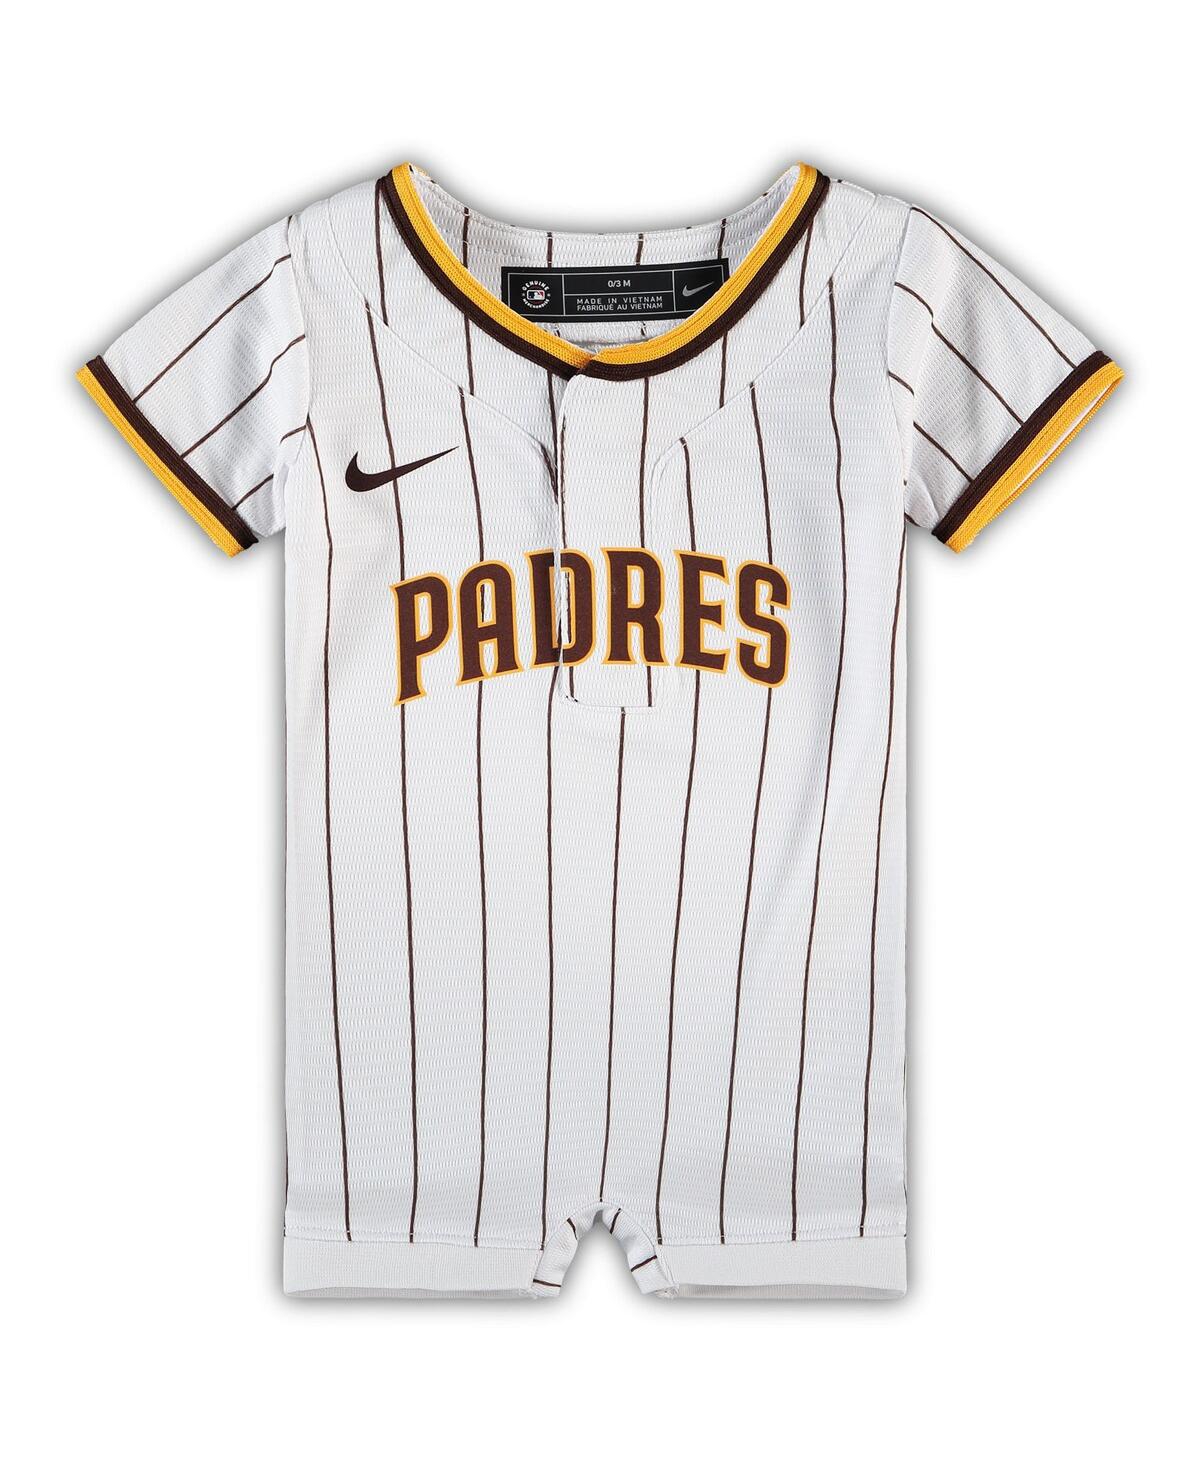 NIKE NEWBORN AND INFANT BOYS AND GIRLS NIKE WHITE SAN DIEGO PADRES OFFICIAL JERSEY ROMPER